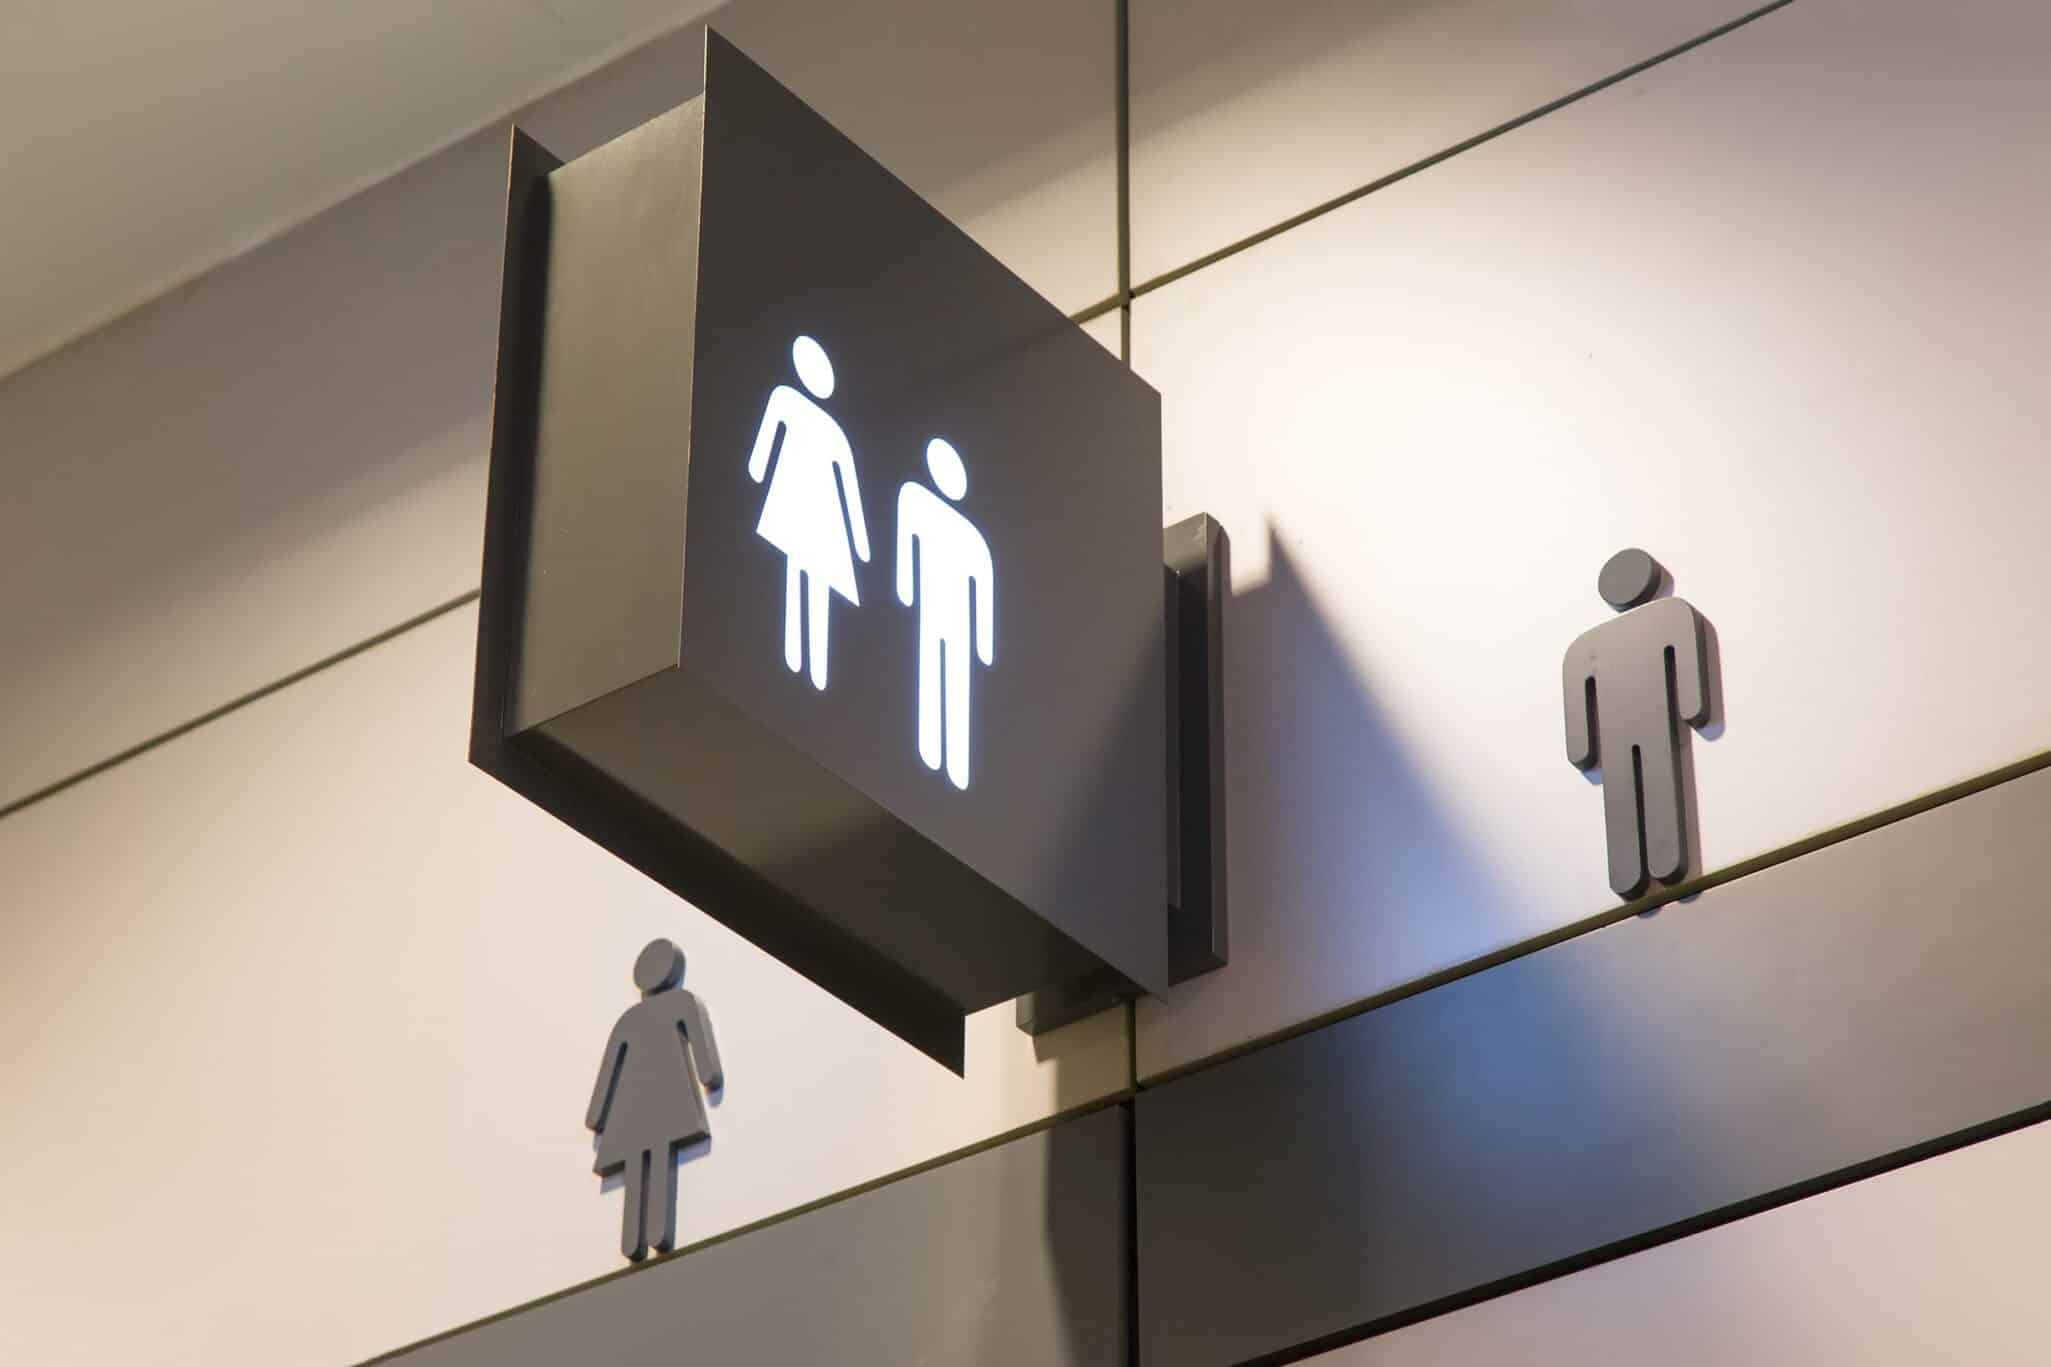 Image credit: Shutterstock / FUN FUN PHOTO <p>When you gotta go, you gotta go. Flush finds you public restrooms nearby, which is a lifesaver in cities where finding a free restroom can be a real hustle.</p>